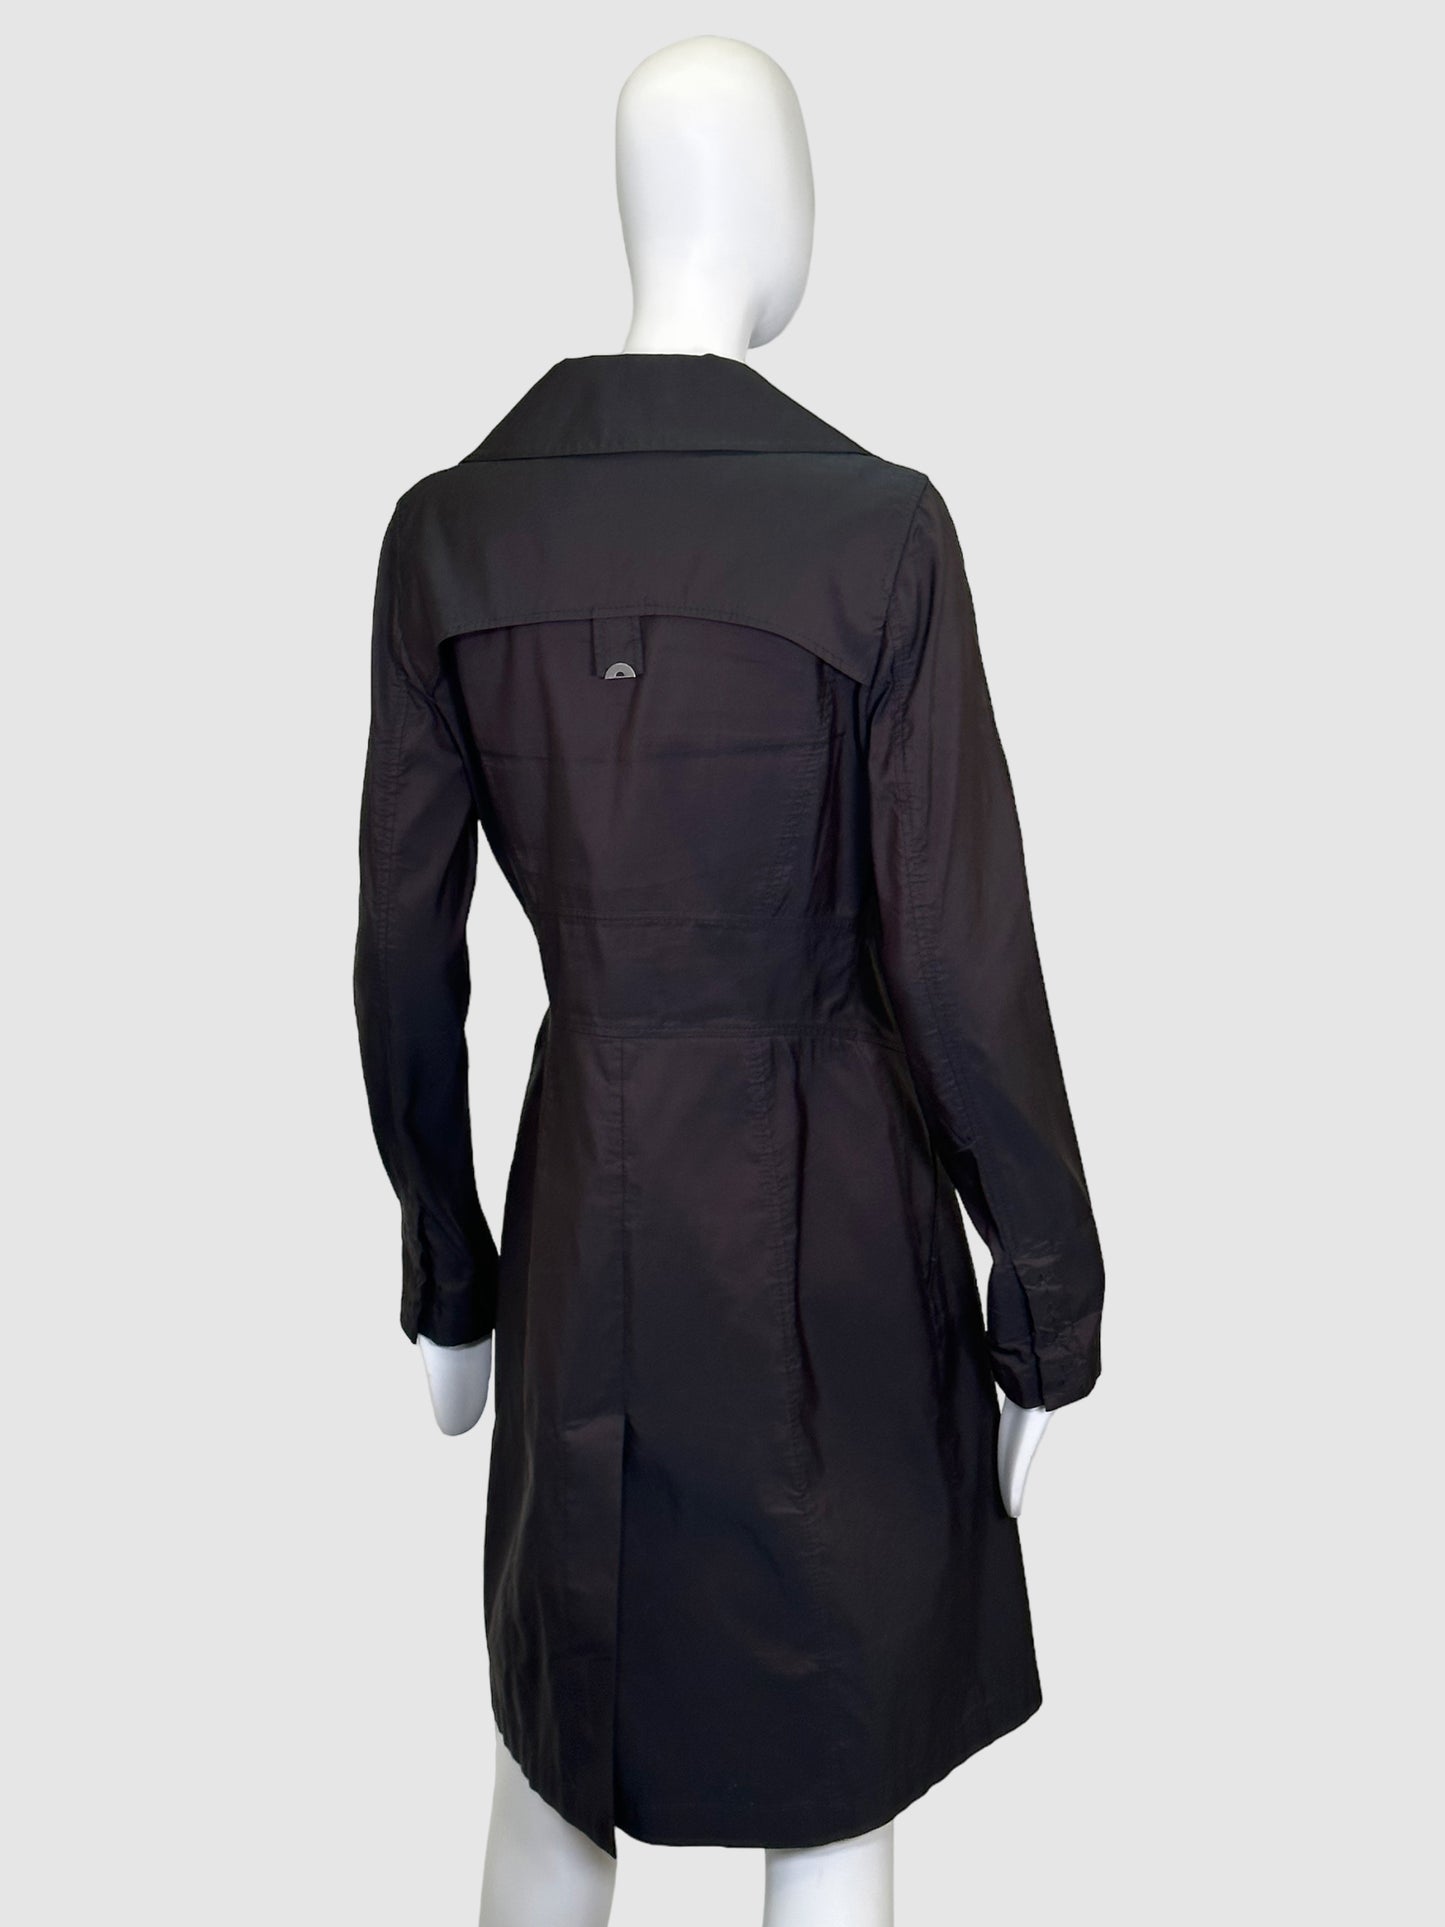 Single-Breasted Trench Coat - Size M